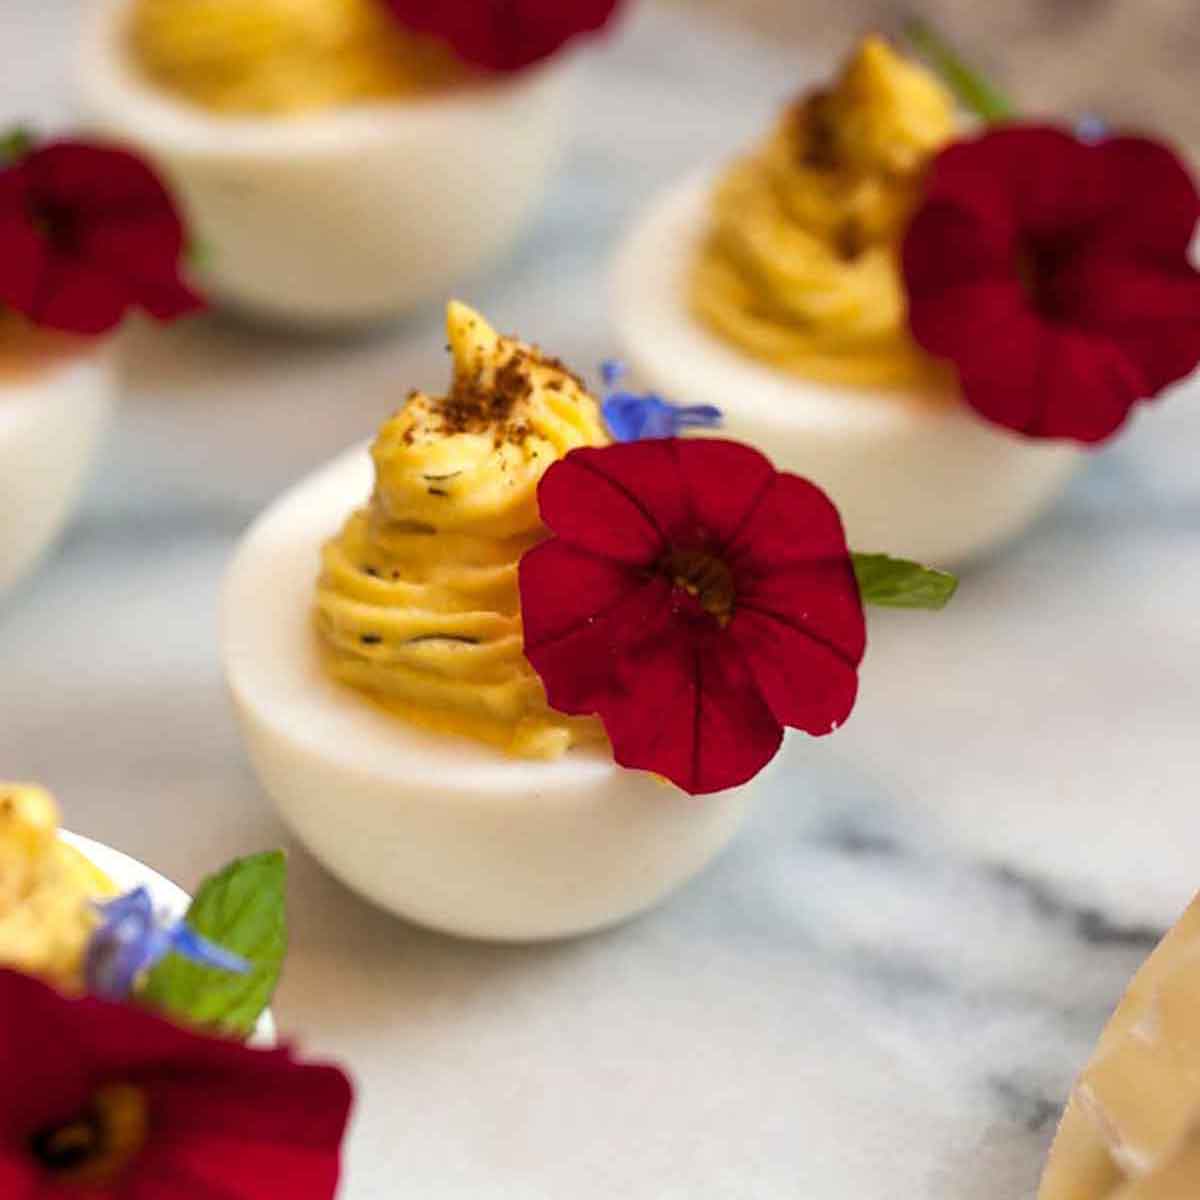 5 deviled eggs, garnished with red flowers on a marble board.